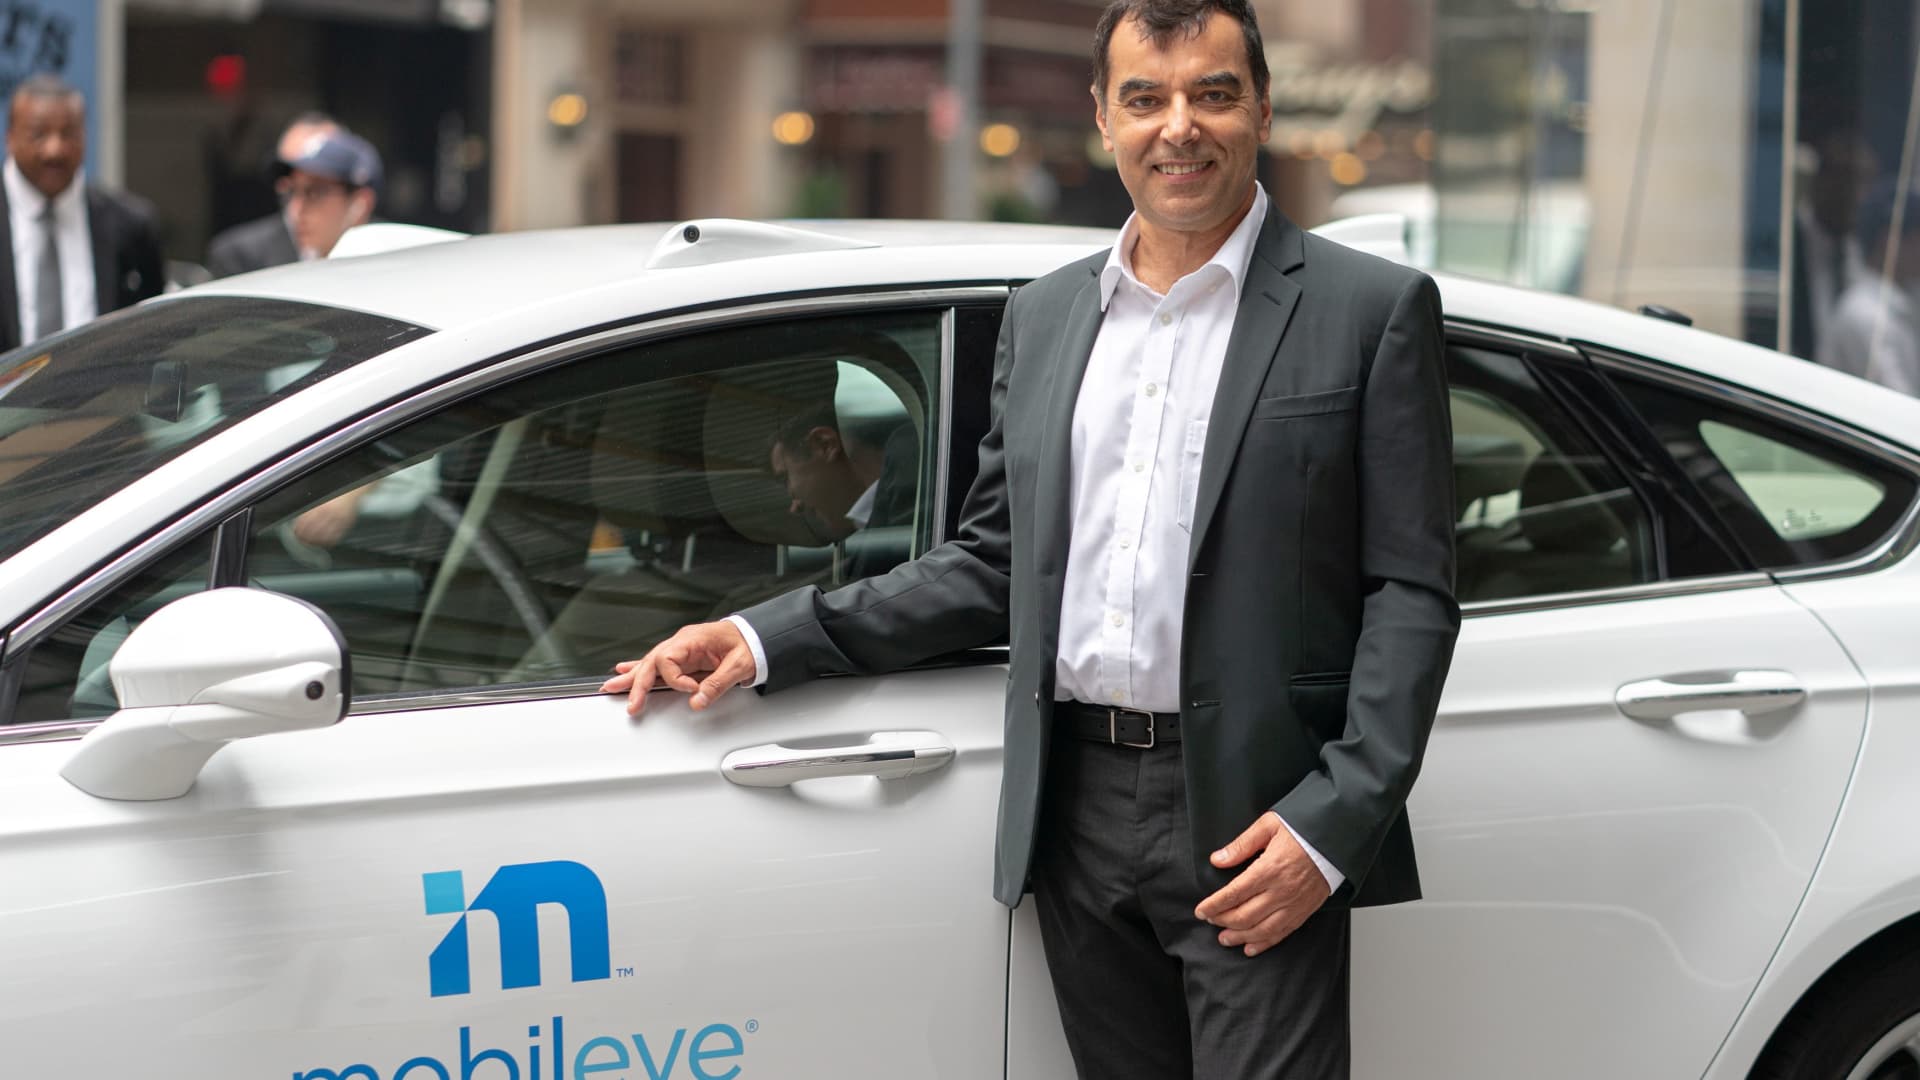 Intel’s self-driving car division Mobileye files for IPO